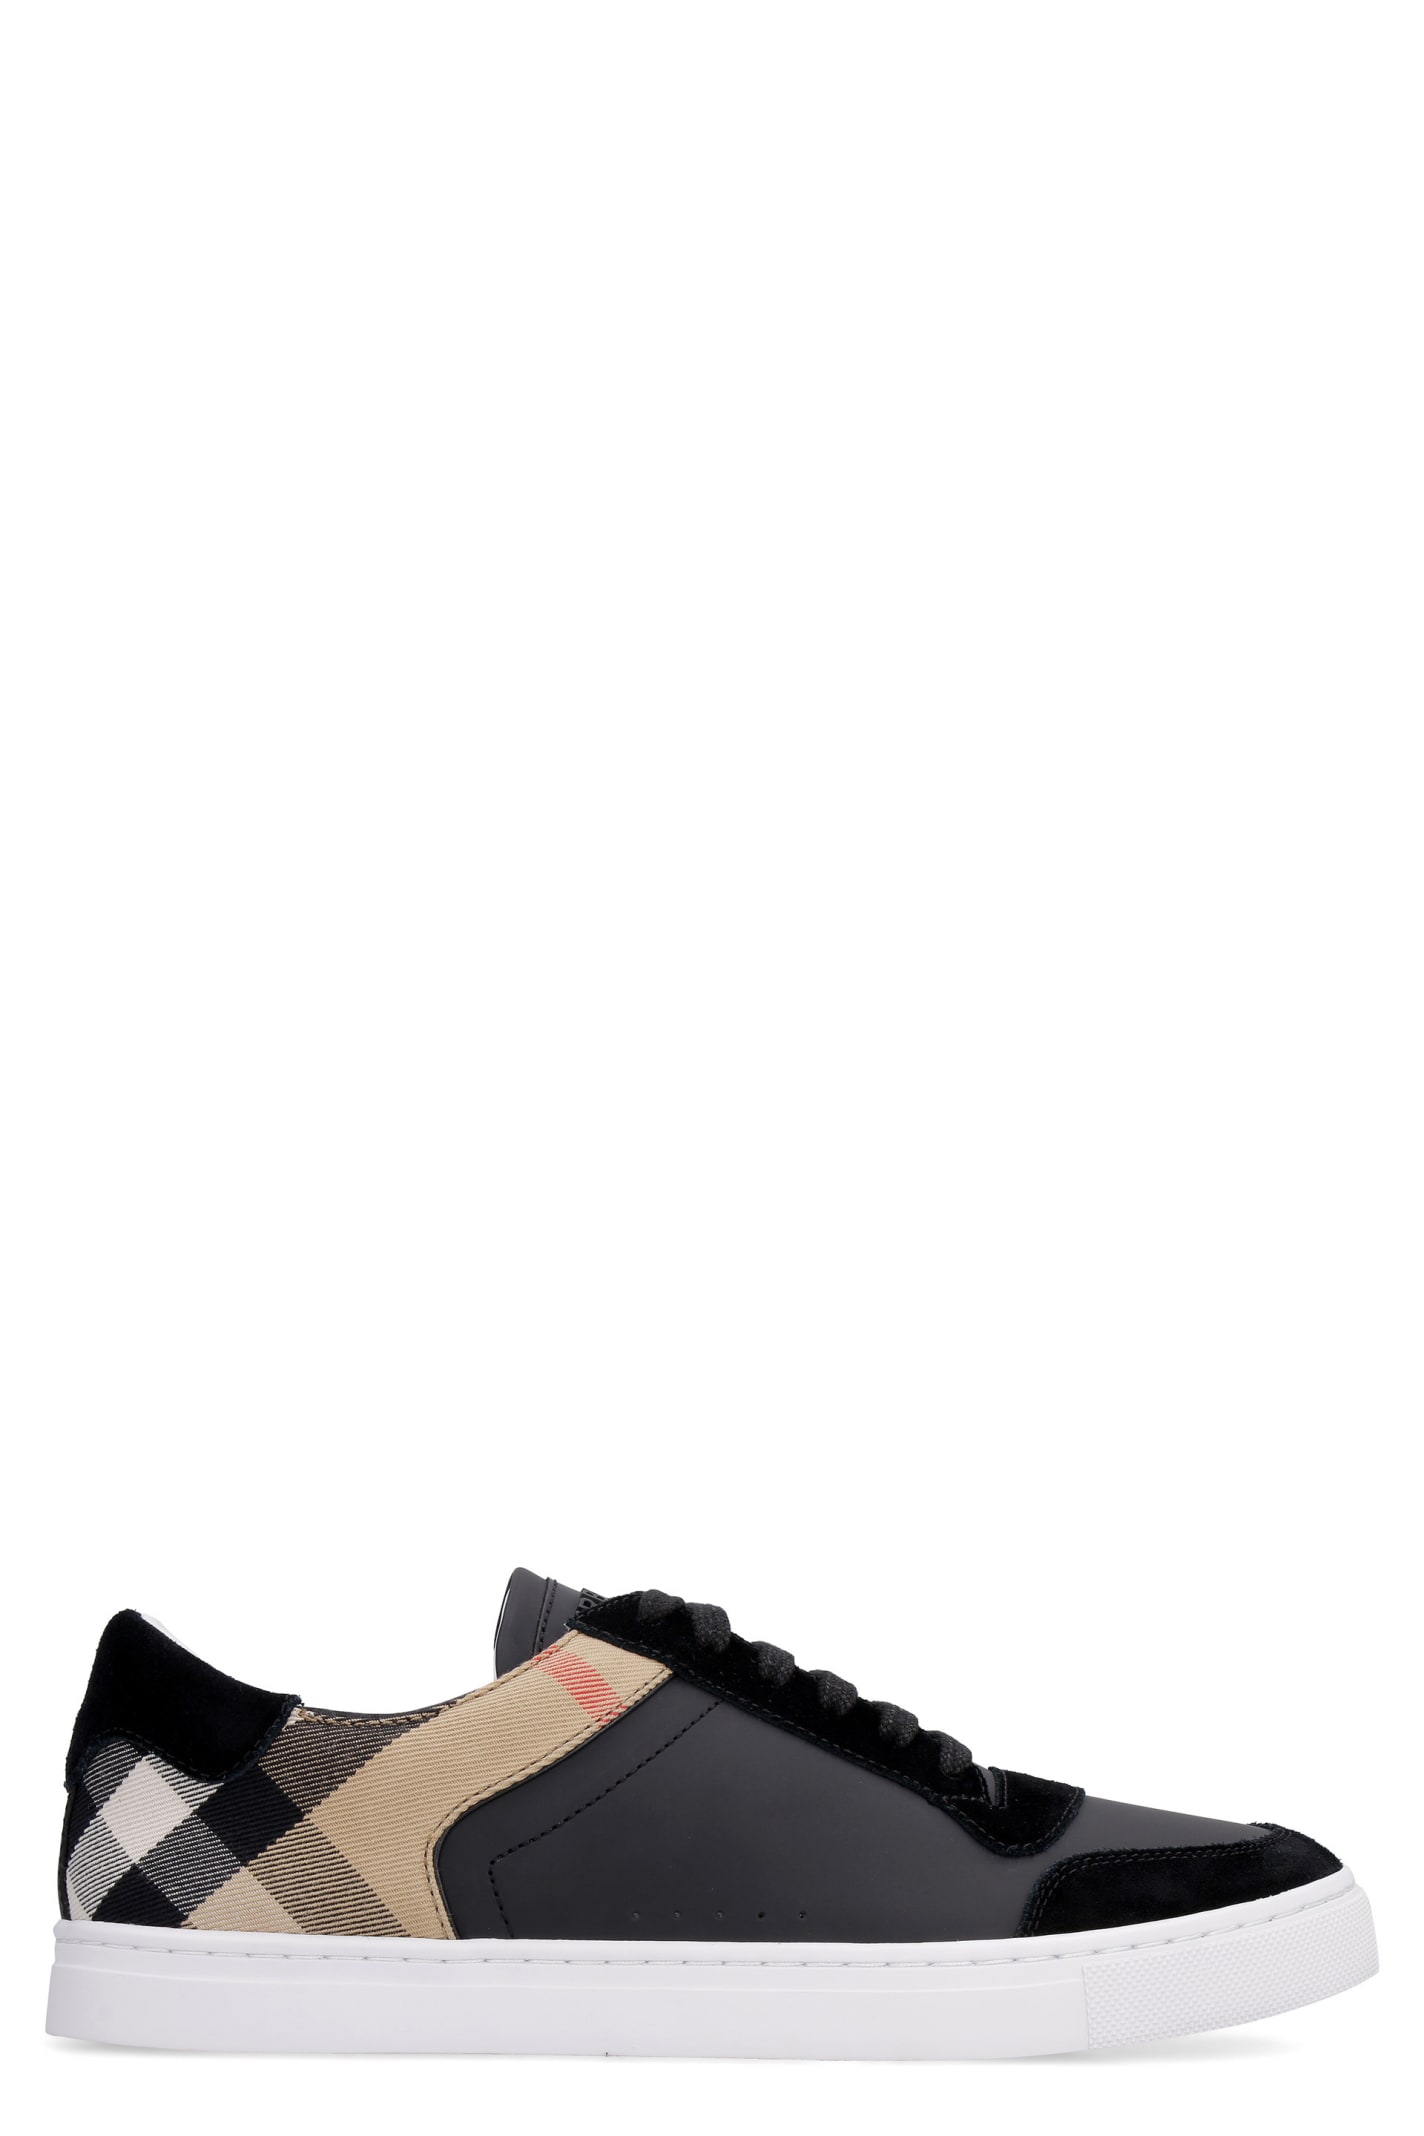 BURBERRY LEATHER AND SUEDE SNEAKERS,11206799